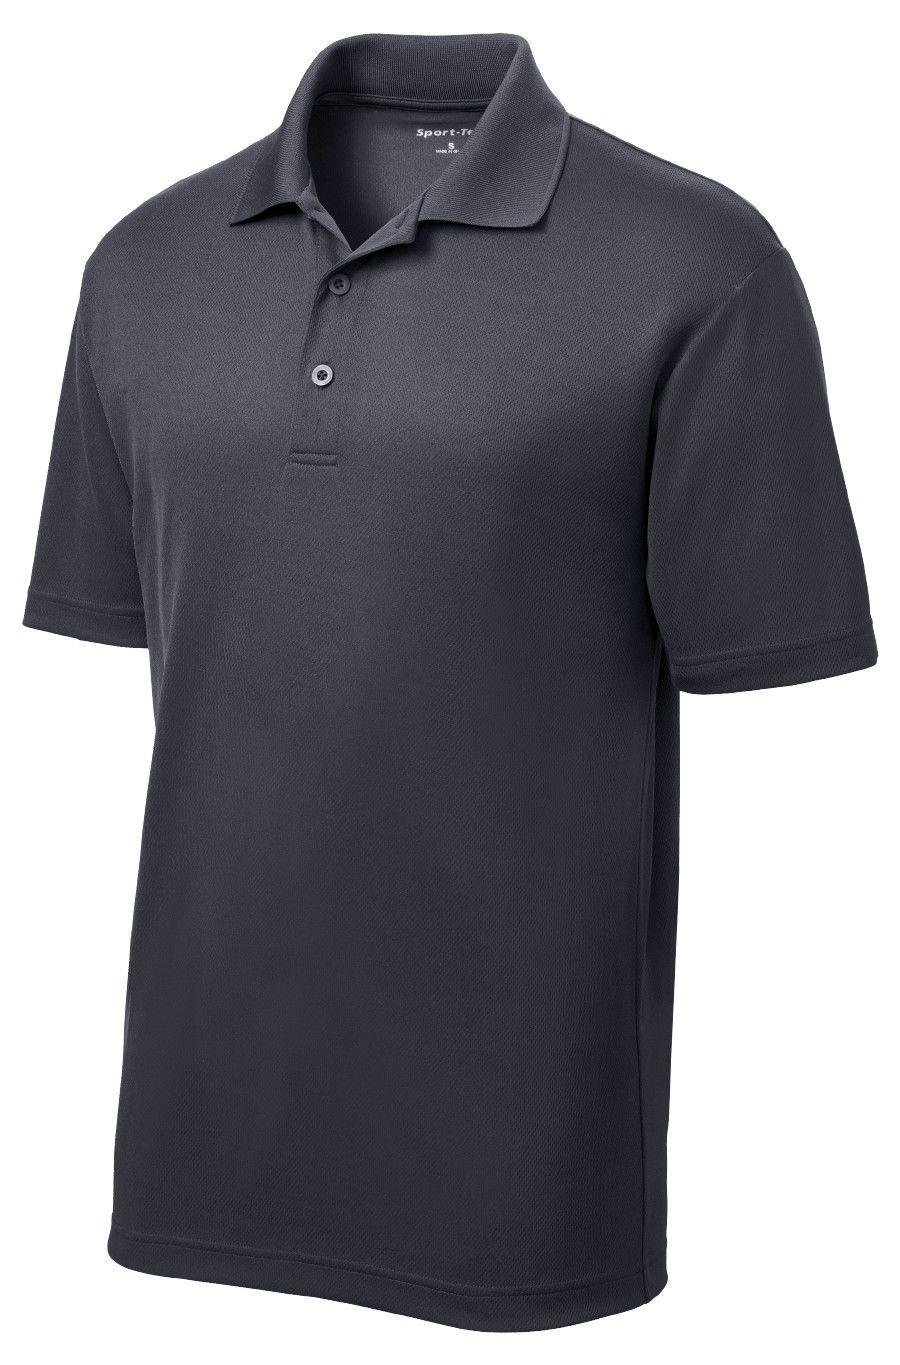 100% polyester dry fit men's sports polo t shirts 5